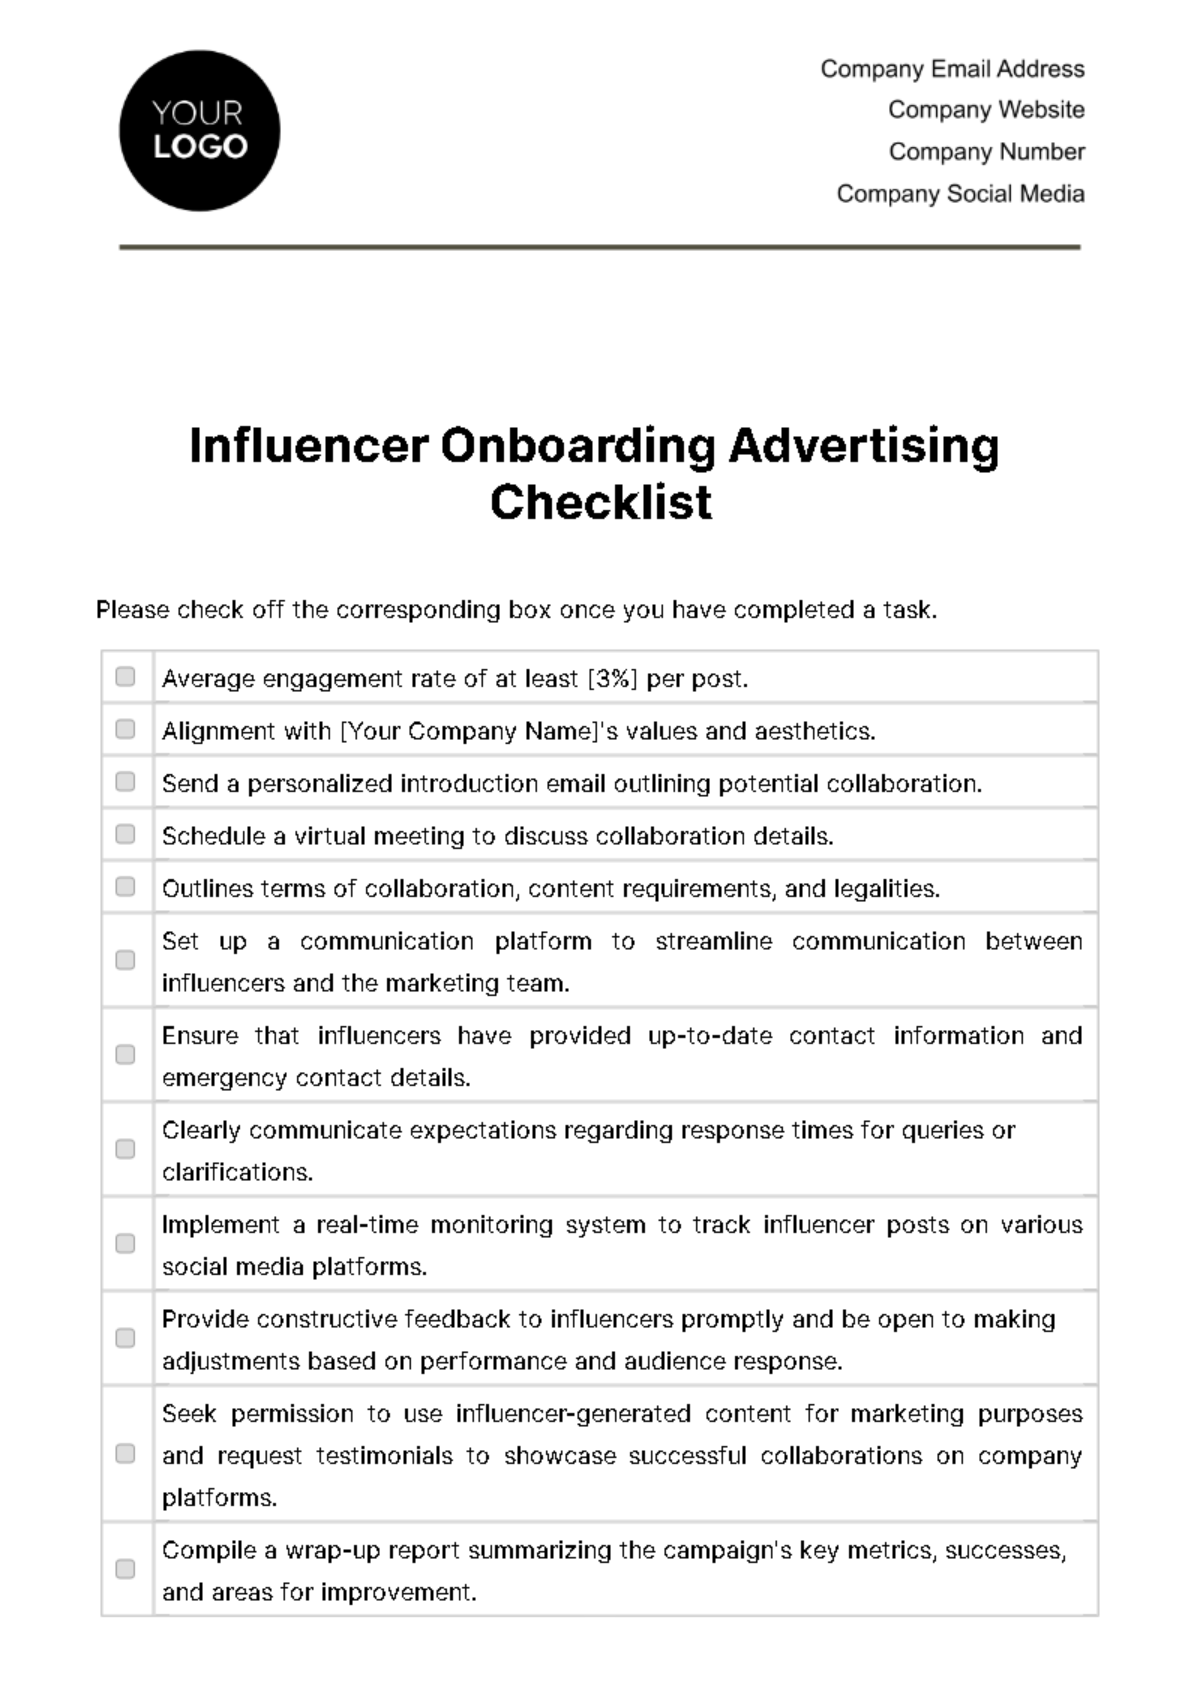 Influencer Onboarding Advertising Checklist Template